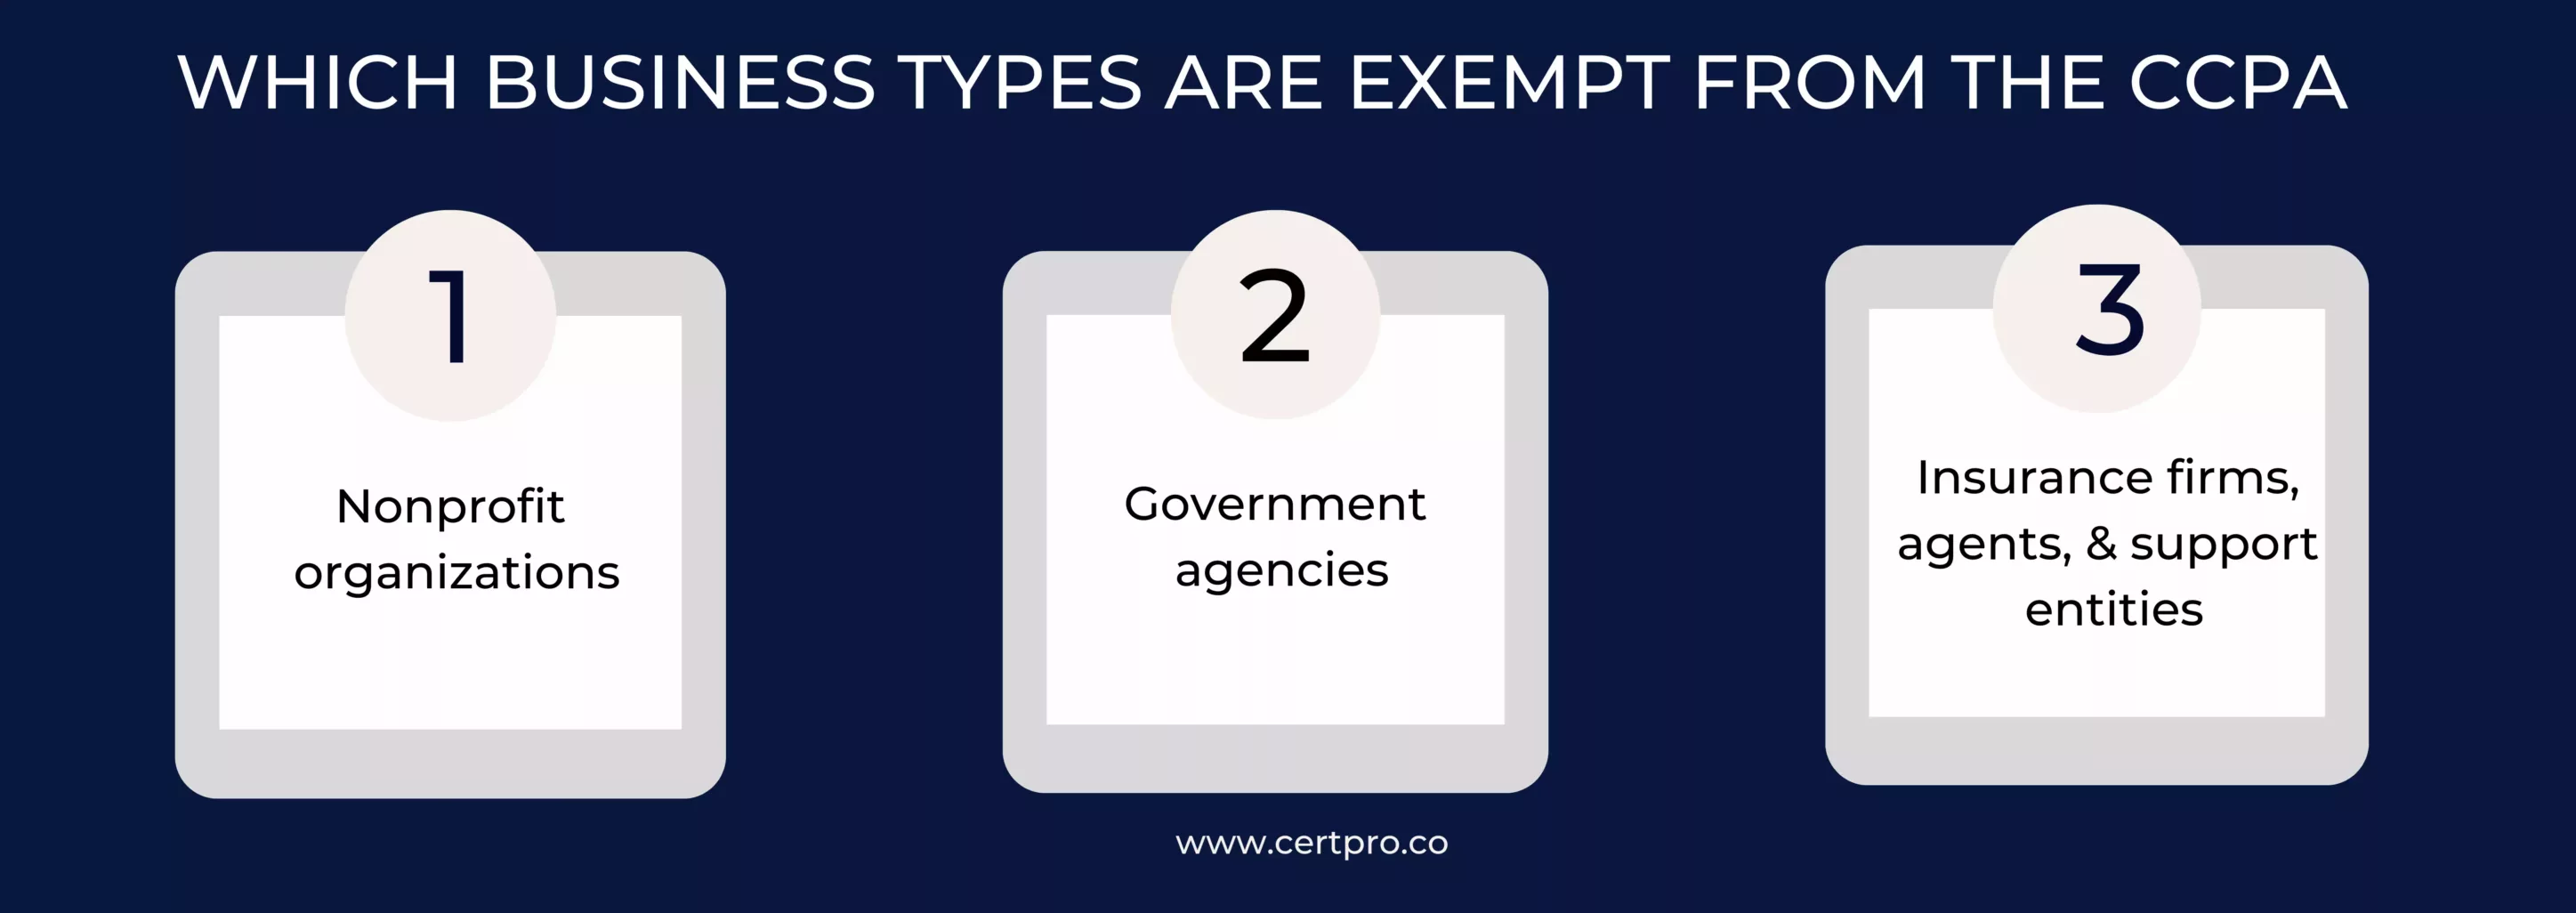 Which business types are exempt from CCPA